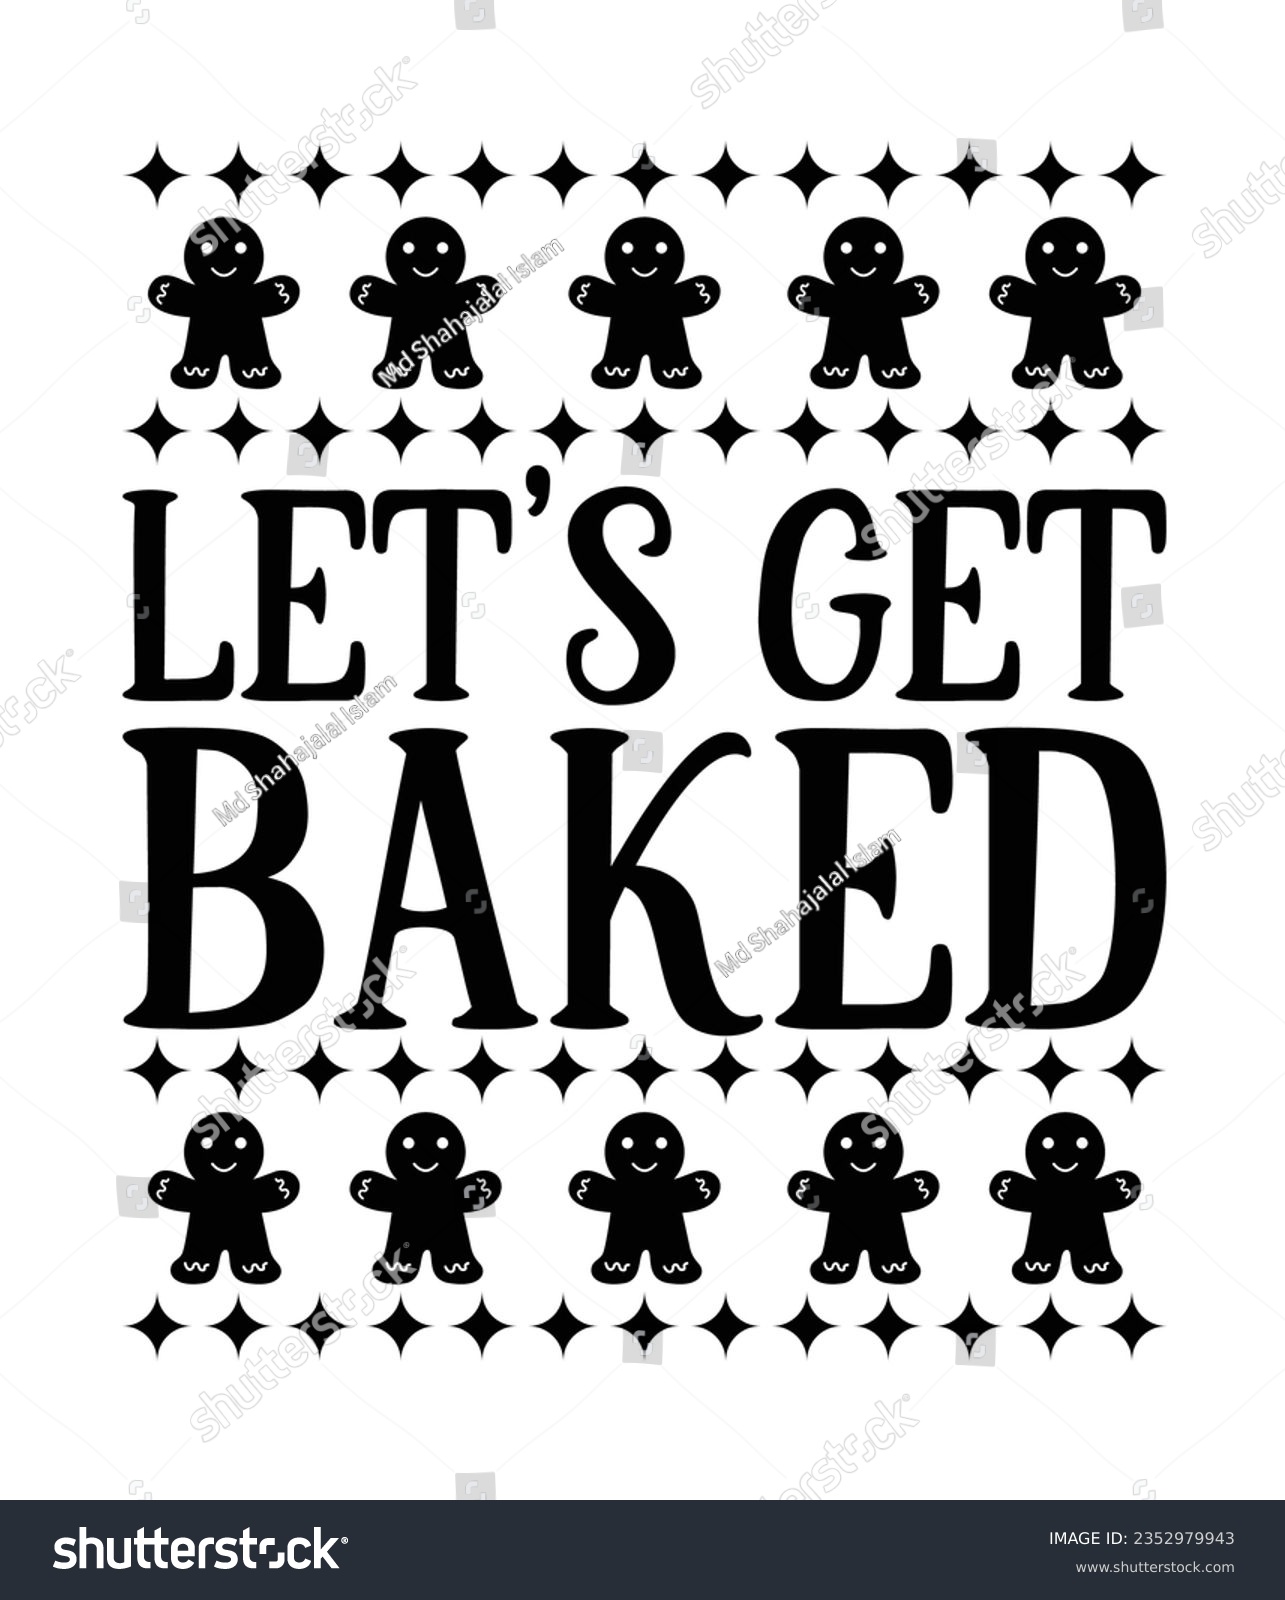 SVG of Let’s get baked, Christmas SVG, Funny Christmas Quotes, Winter SVG, Merry Christmas, Santa SVG, typography, vintage, t shirts design, Holiday shirt svg